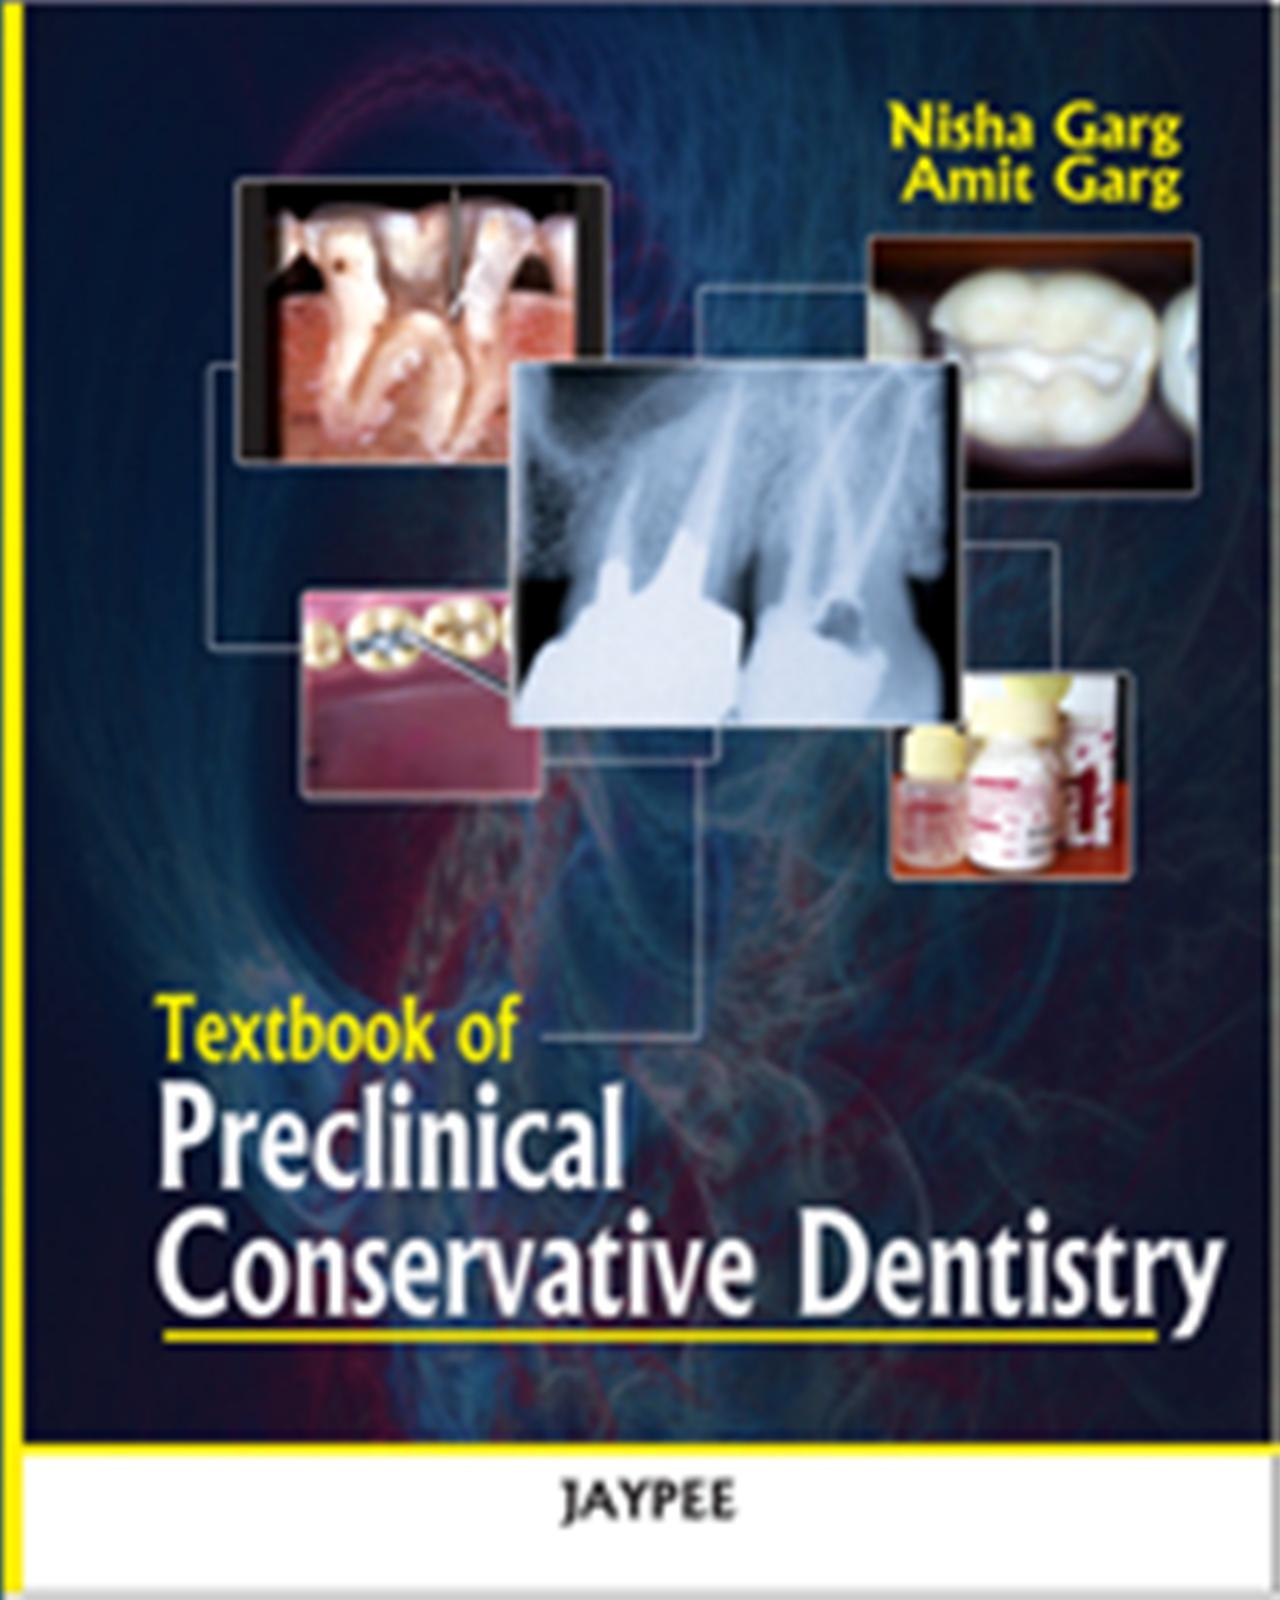 Textbook of Preclinical Conservative Dentistry 2011